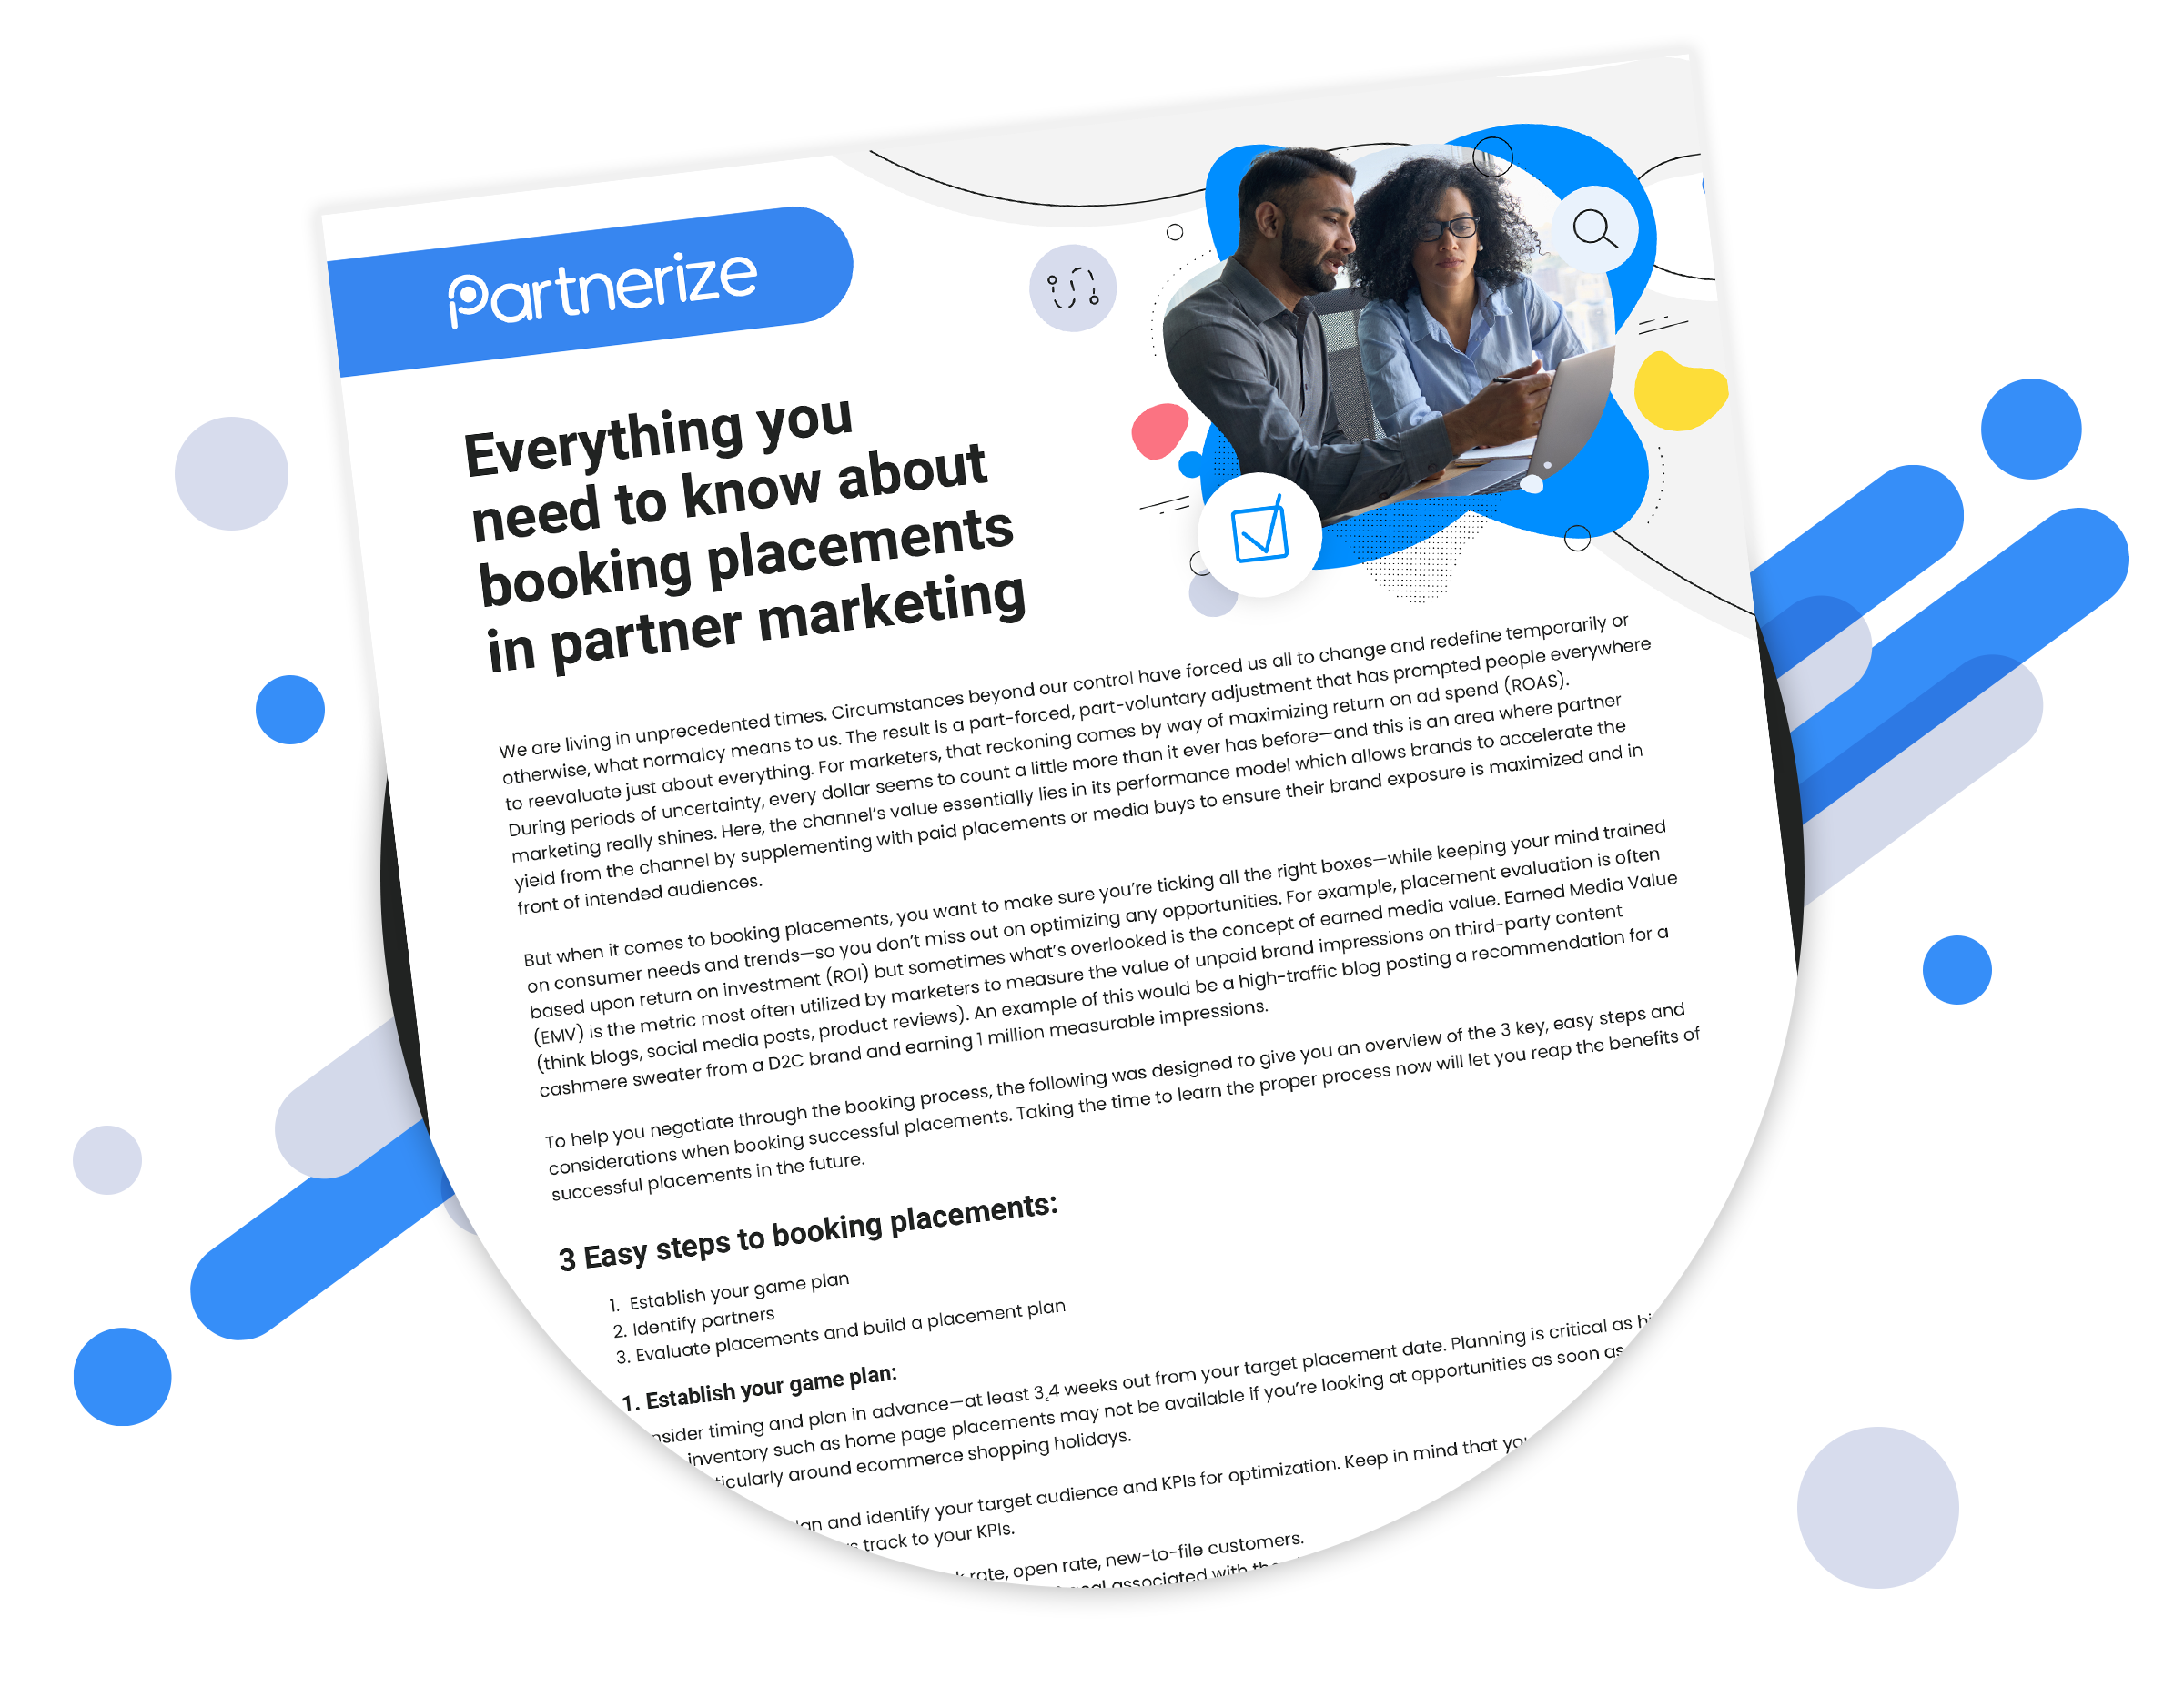 Booking_placement_featured_image